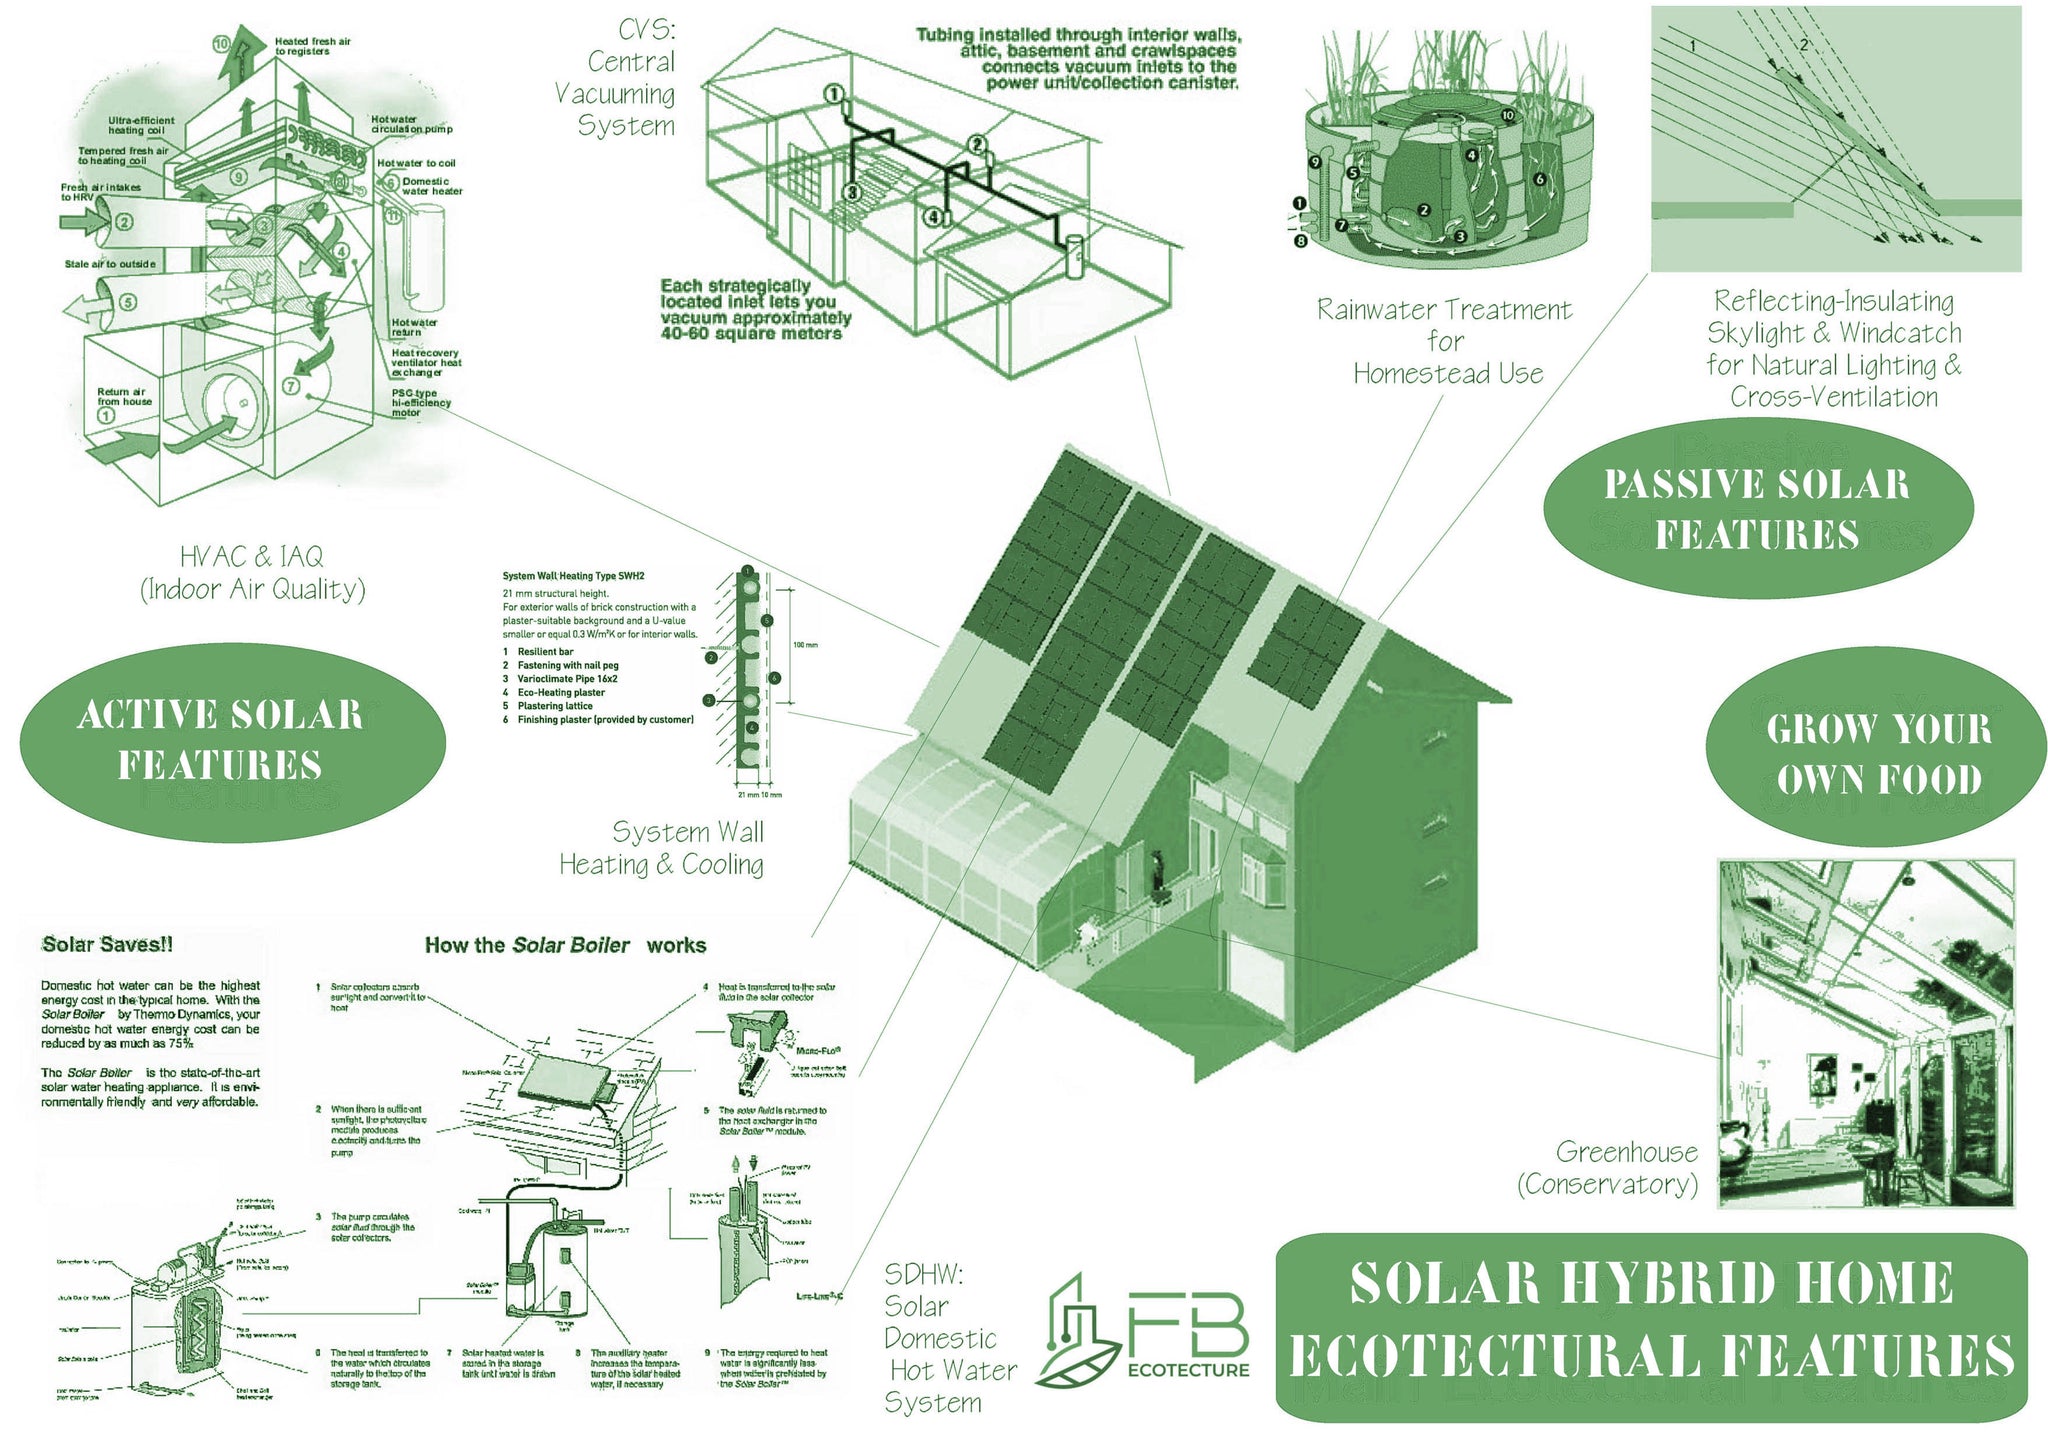 05 Solar Hybrid Home Plans - Ecotectural Features